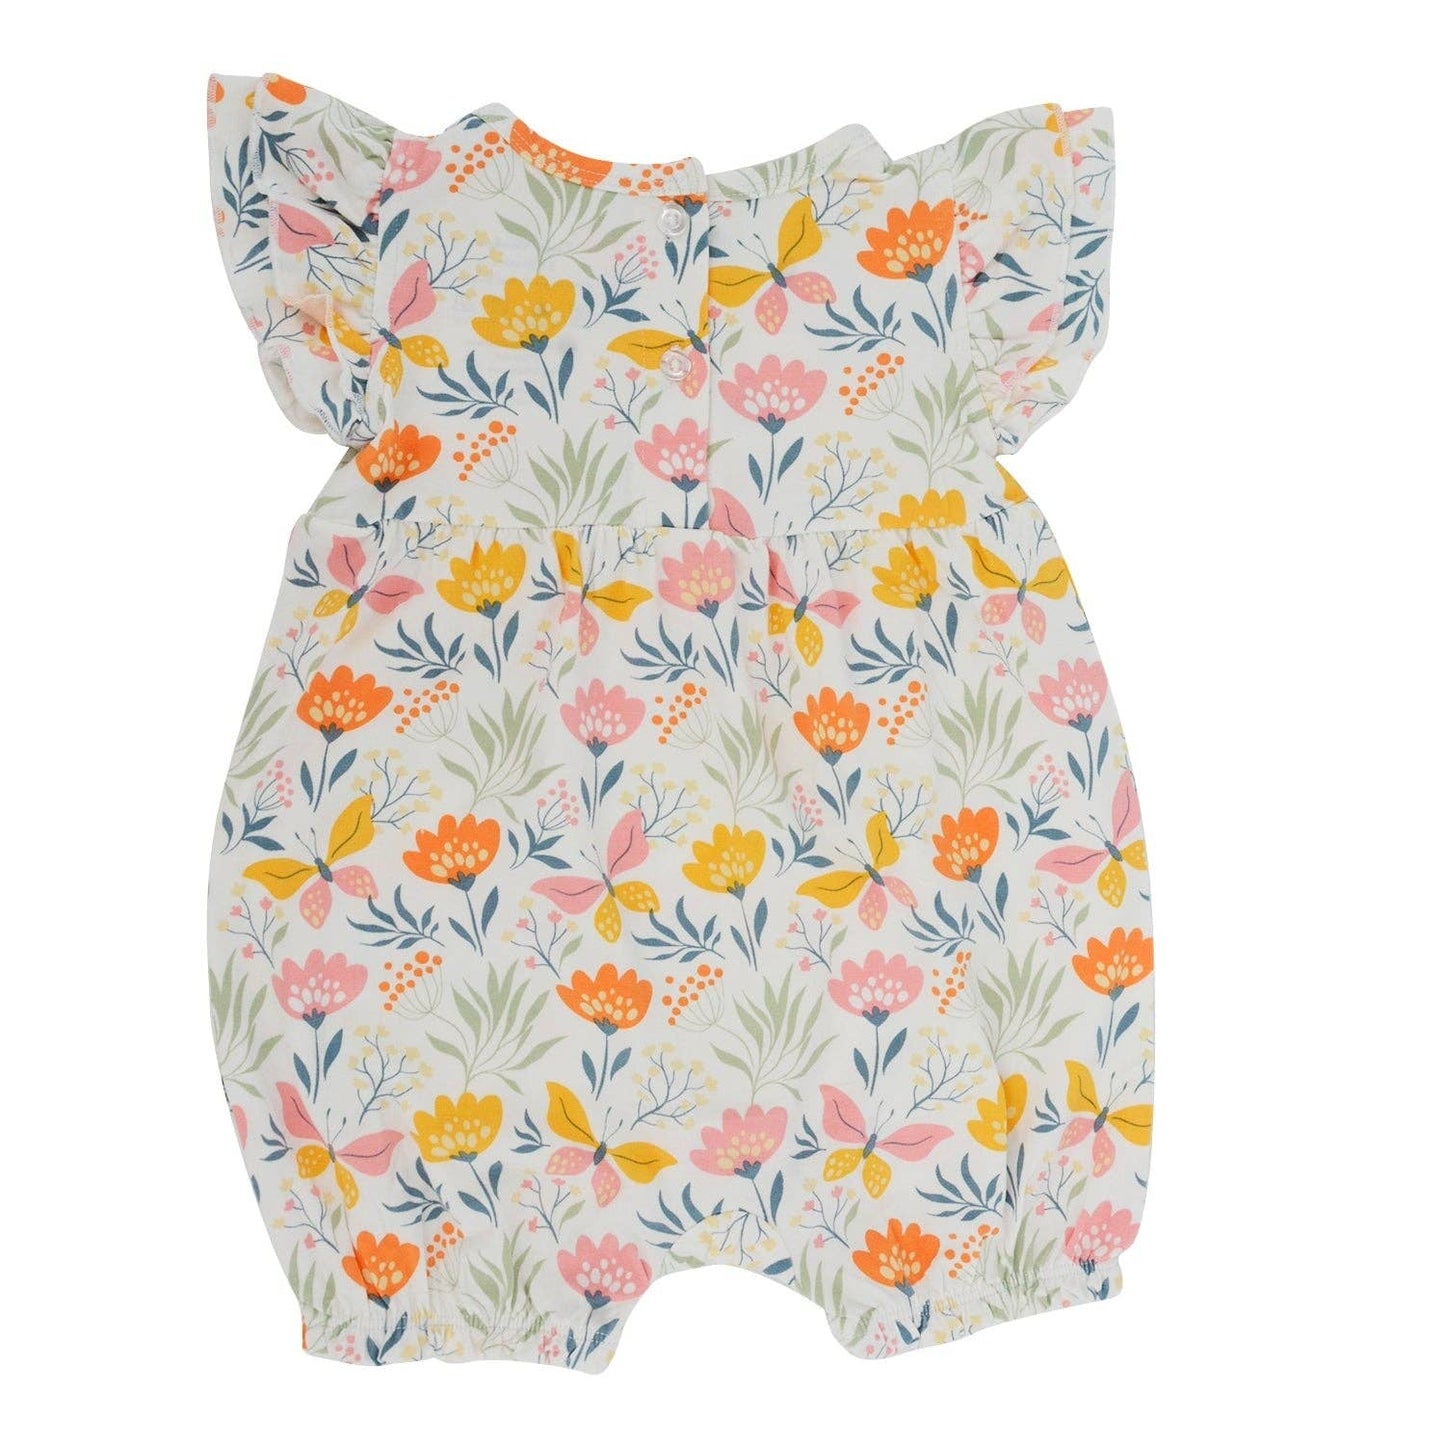 Ruffle Romper - Butterfly Floral